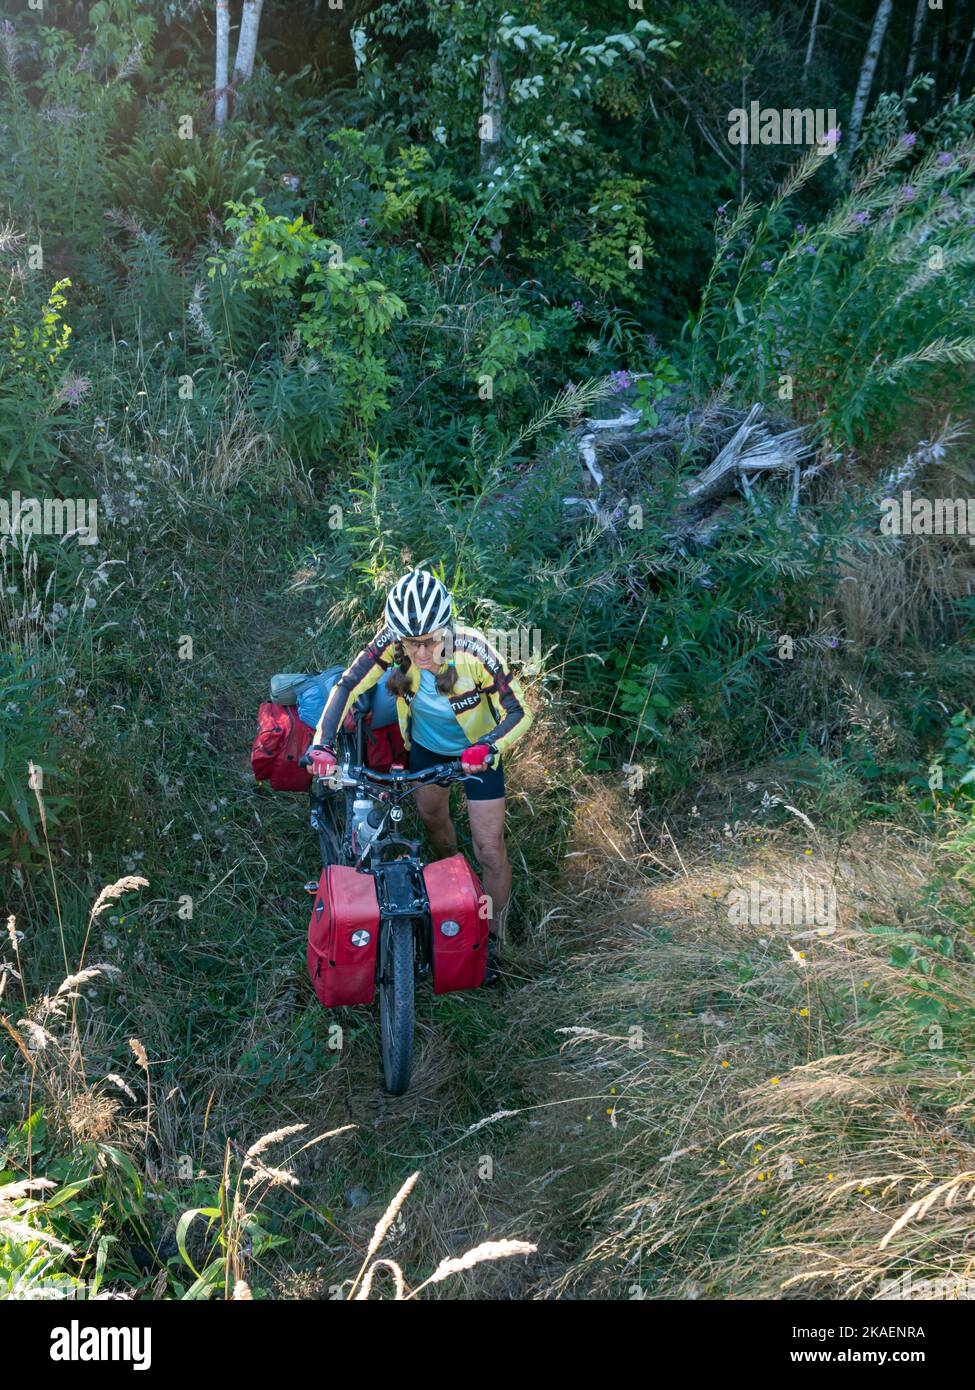 WA22675-00...WASHINGTON - Pushing her bike through a very narrow and very brushy section of trail partially blocked by cement barriers along the board Stock Photo